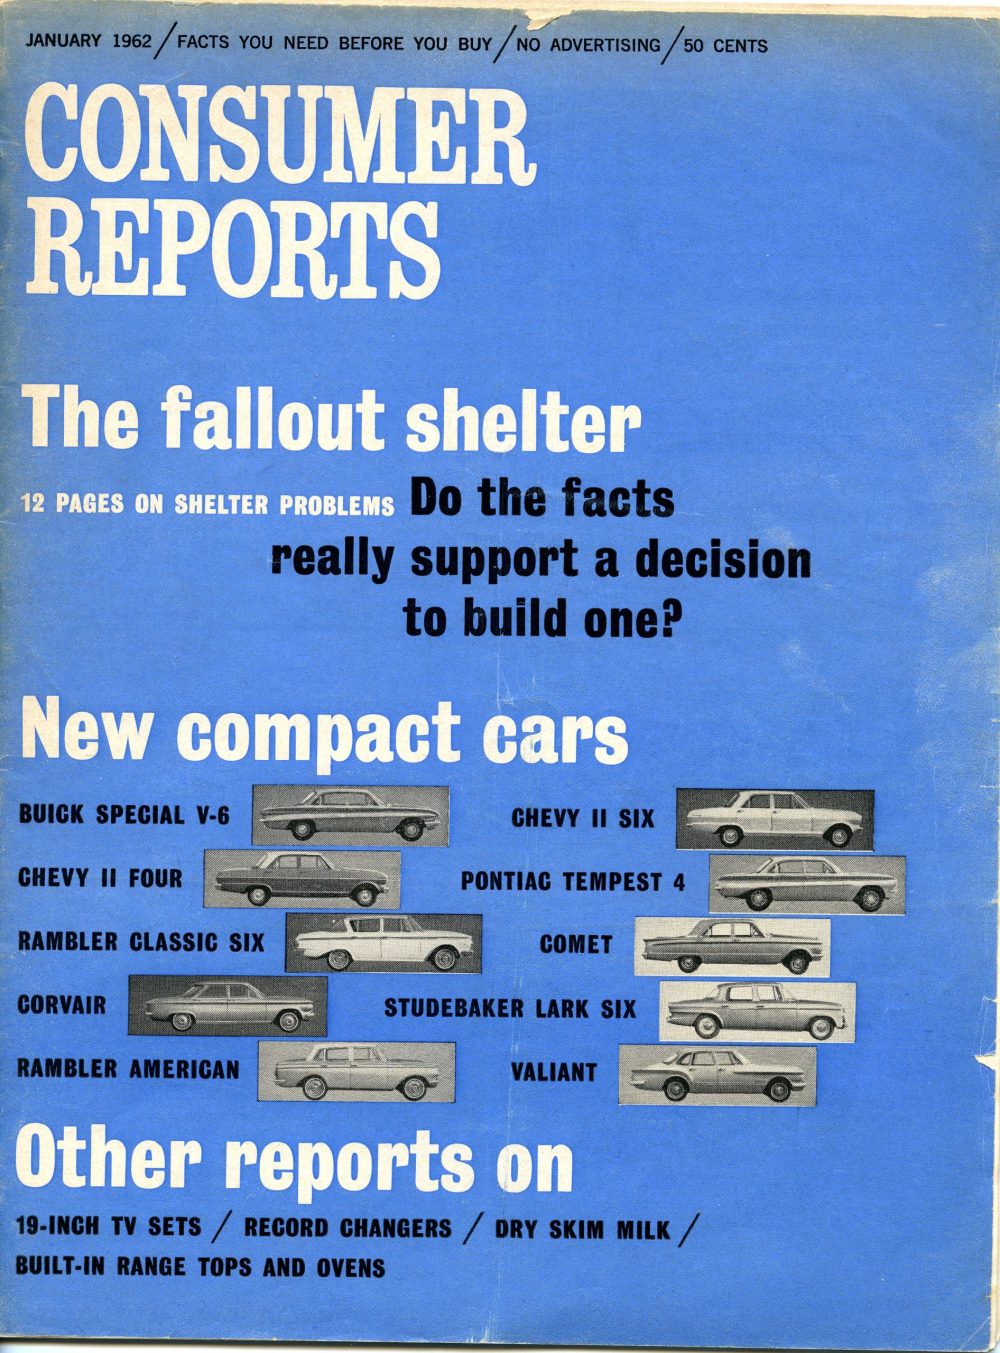 Front cover of the January 1962 Consumer Reports magazine. The cover is blue and features article titles including "the fallout shelter" and "new compact cars" along with images of several small cars. 